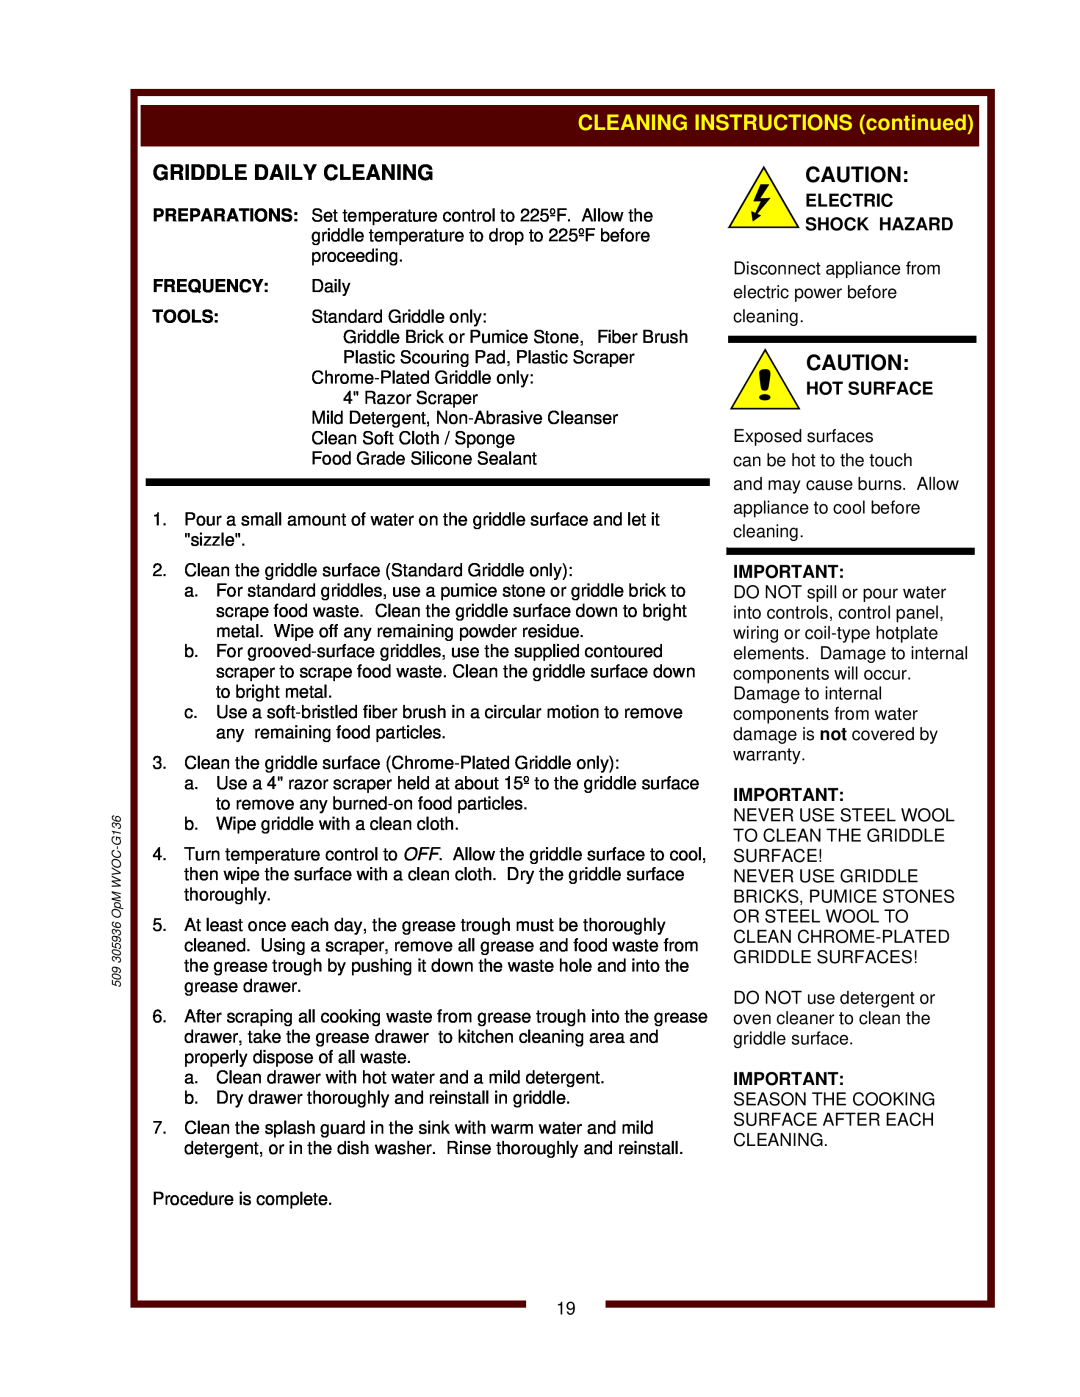 Wells operation manual CLEANING INSTRUCTIONS continued, 509 305936 OpM WVOC-G136 